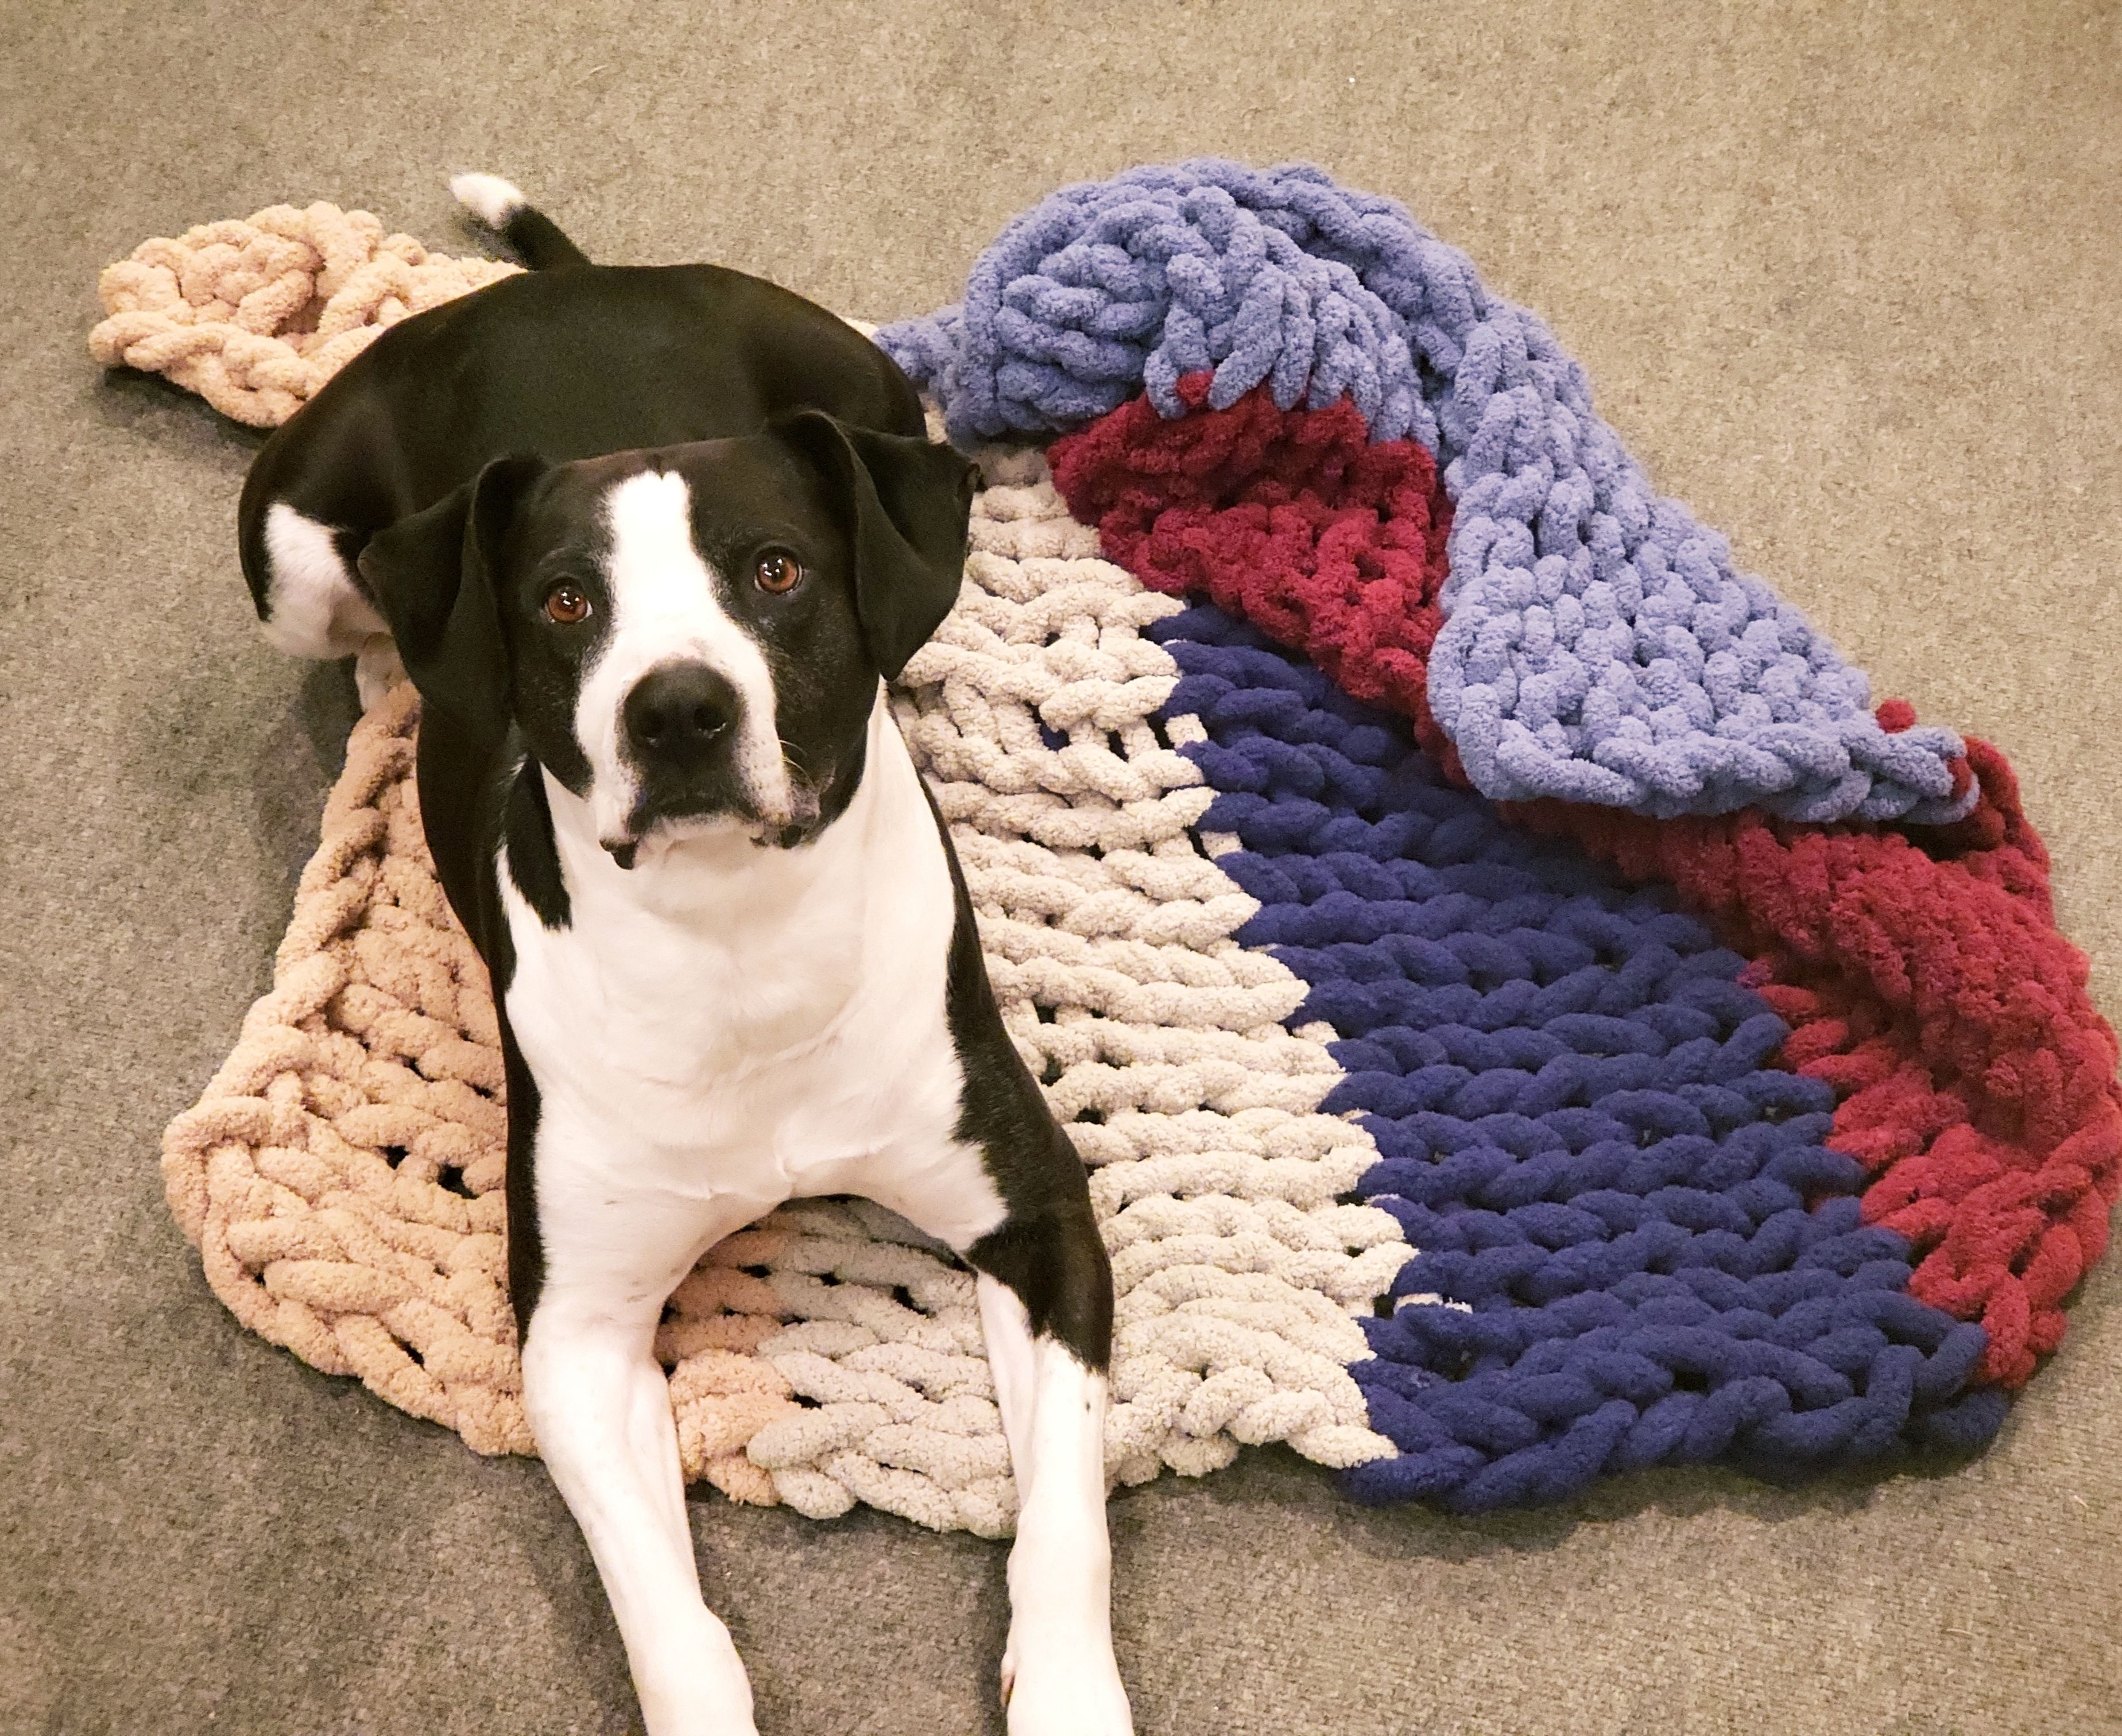 A Doggie chunky blanket workshop experience project by Yaymaker